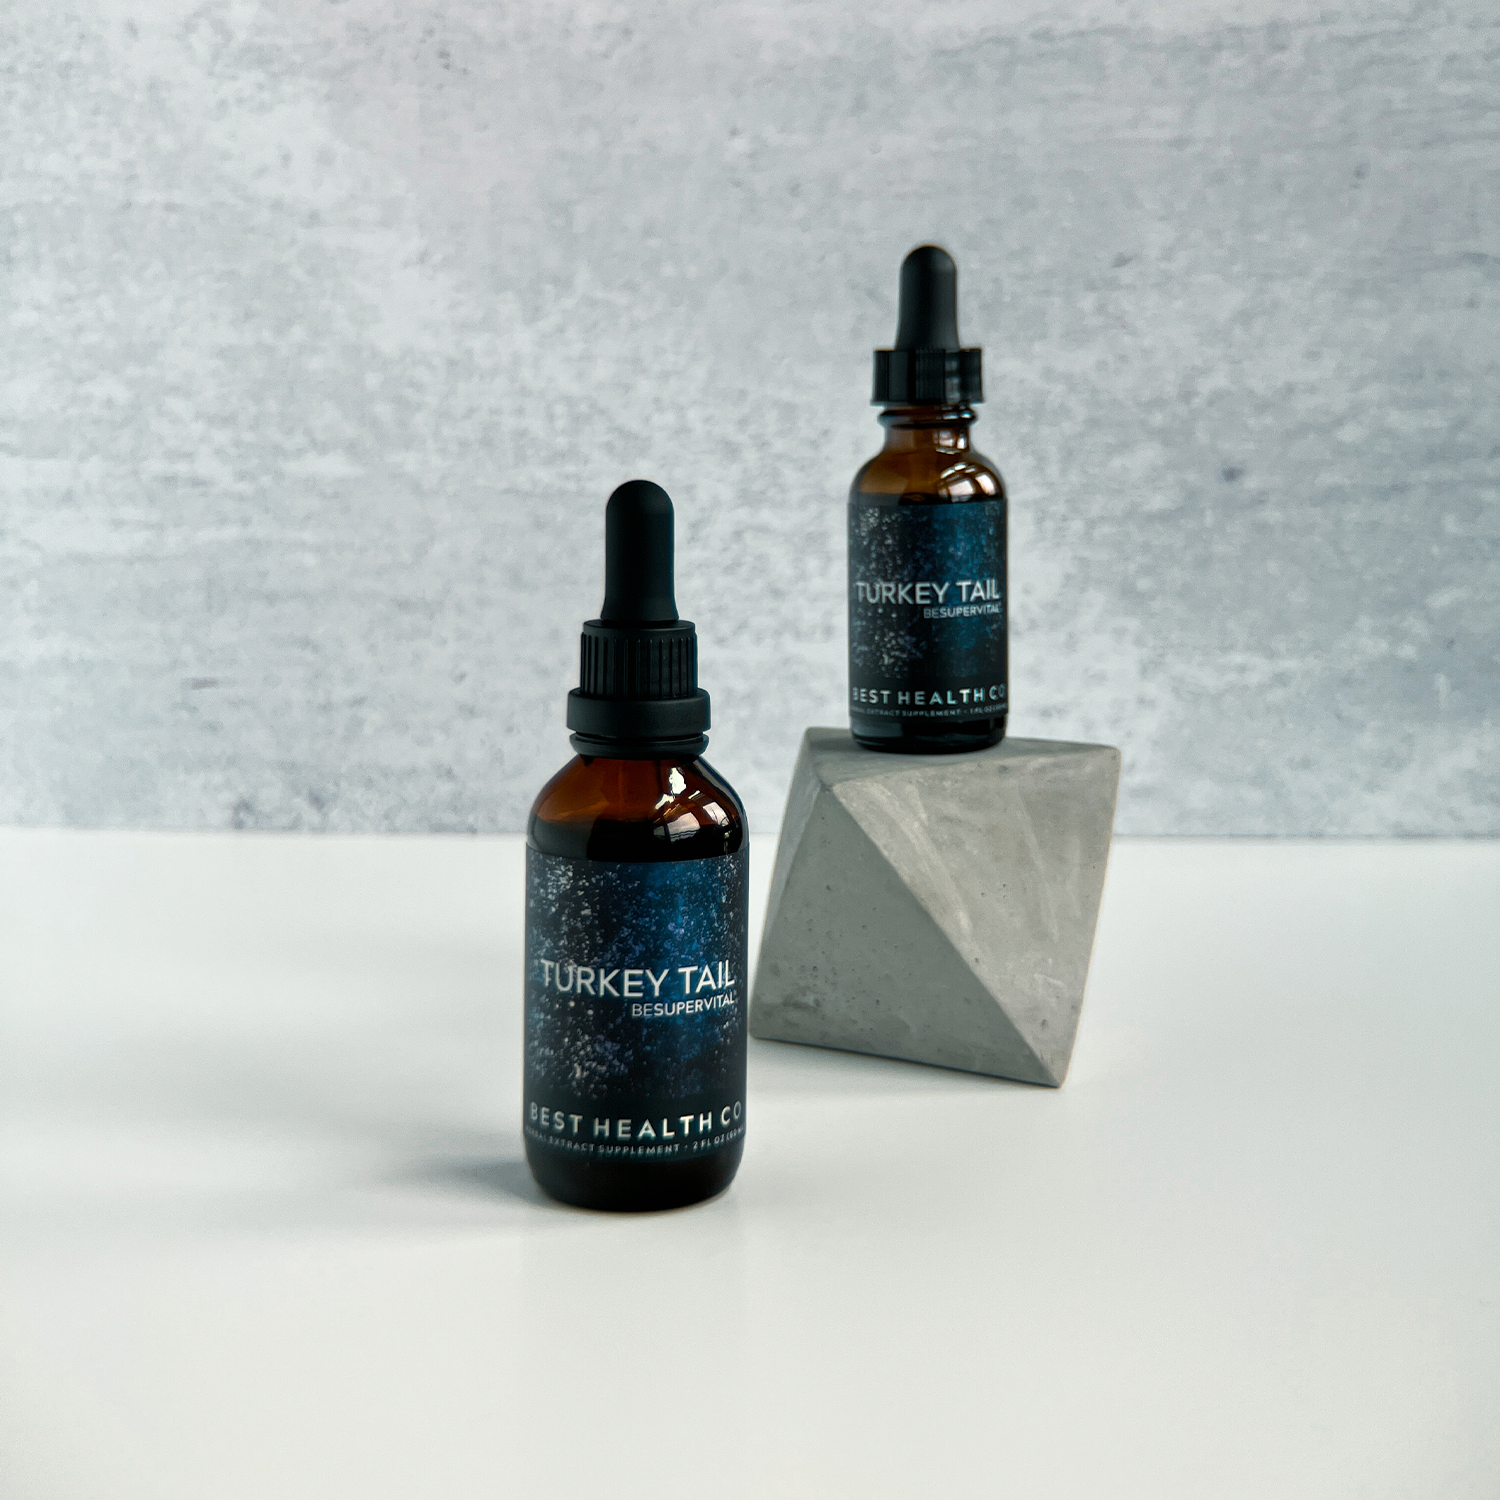 TURKEY TAIL both 2 oz (60mL) and 1oz (30mL) sizes from Best Health Co.